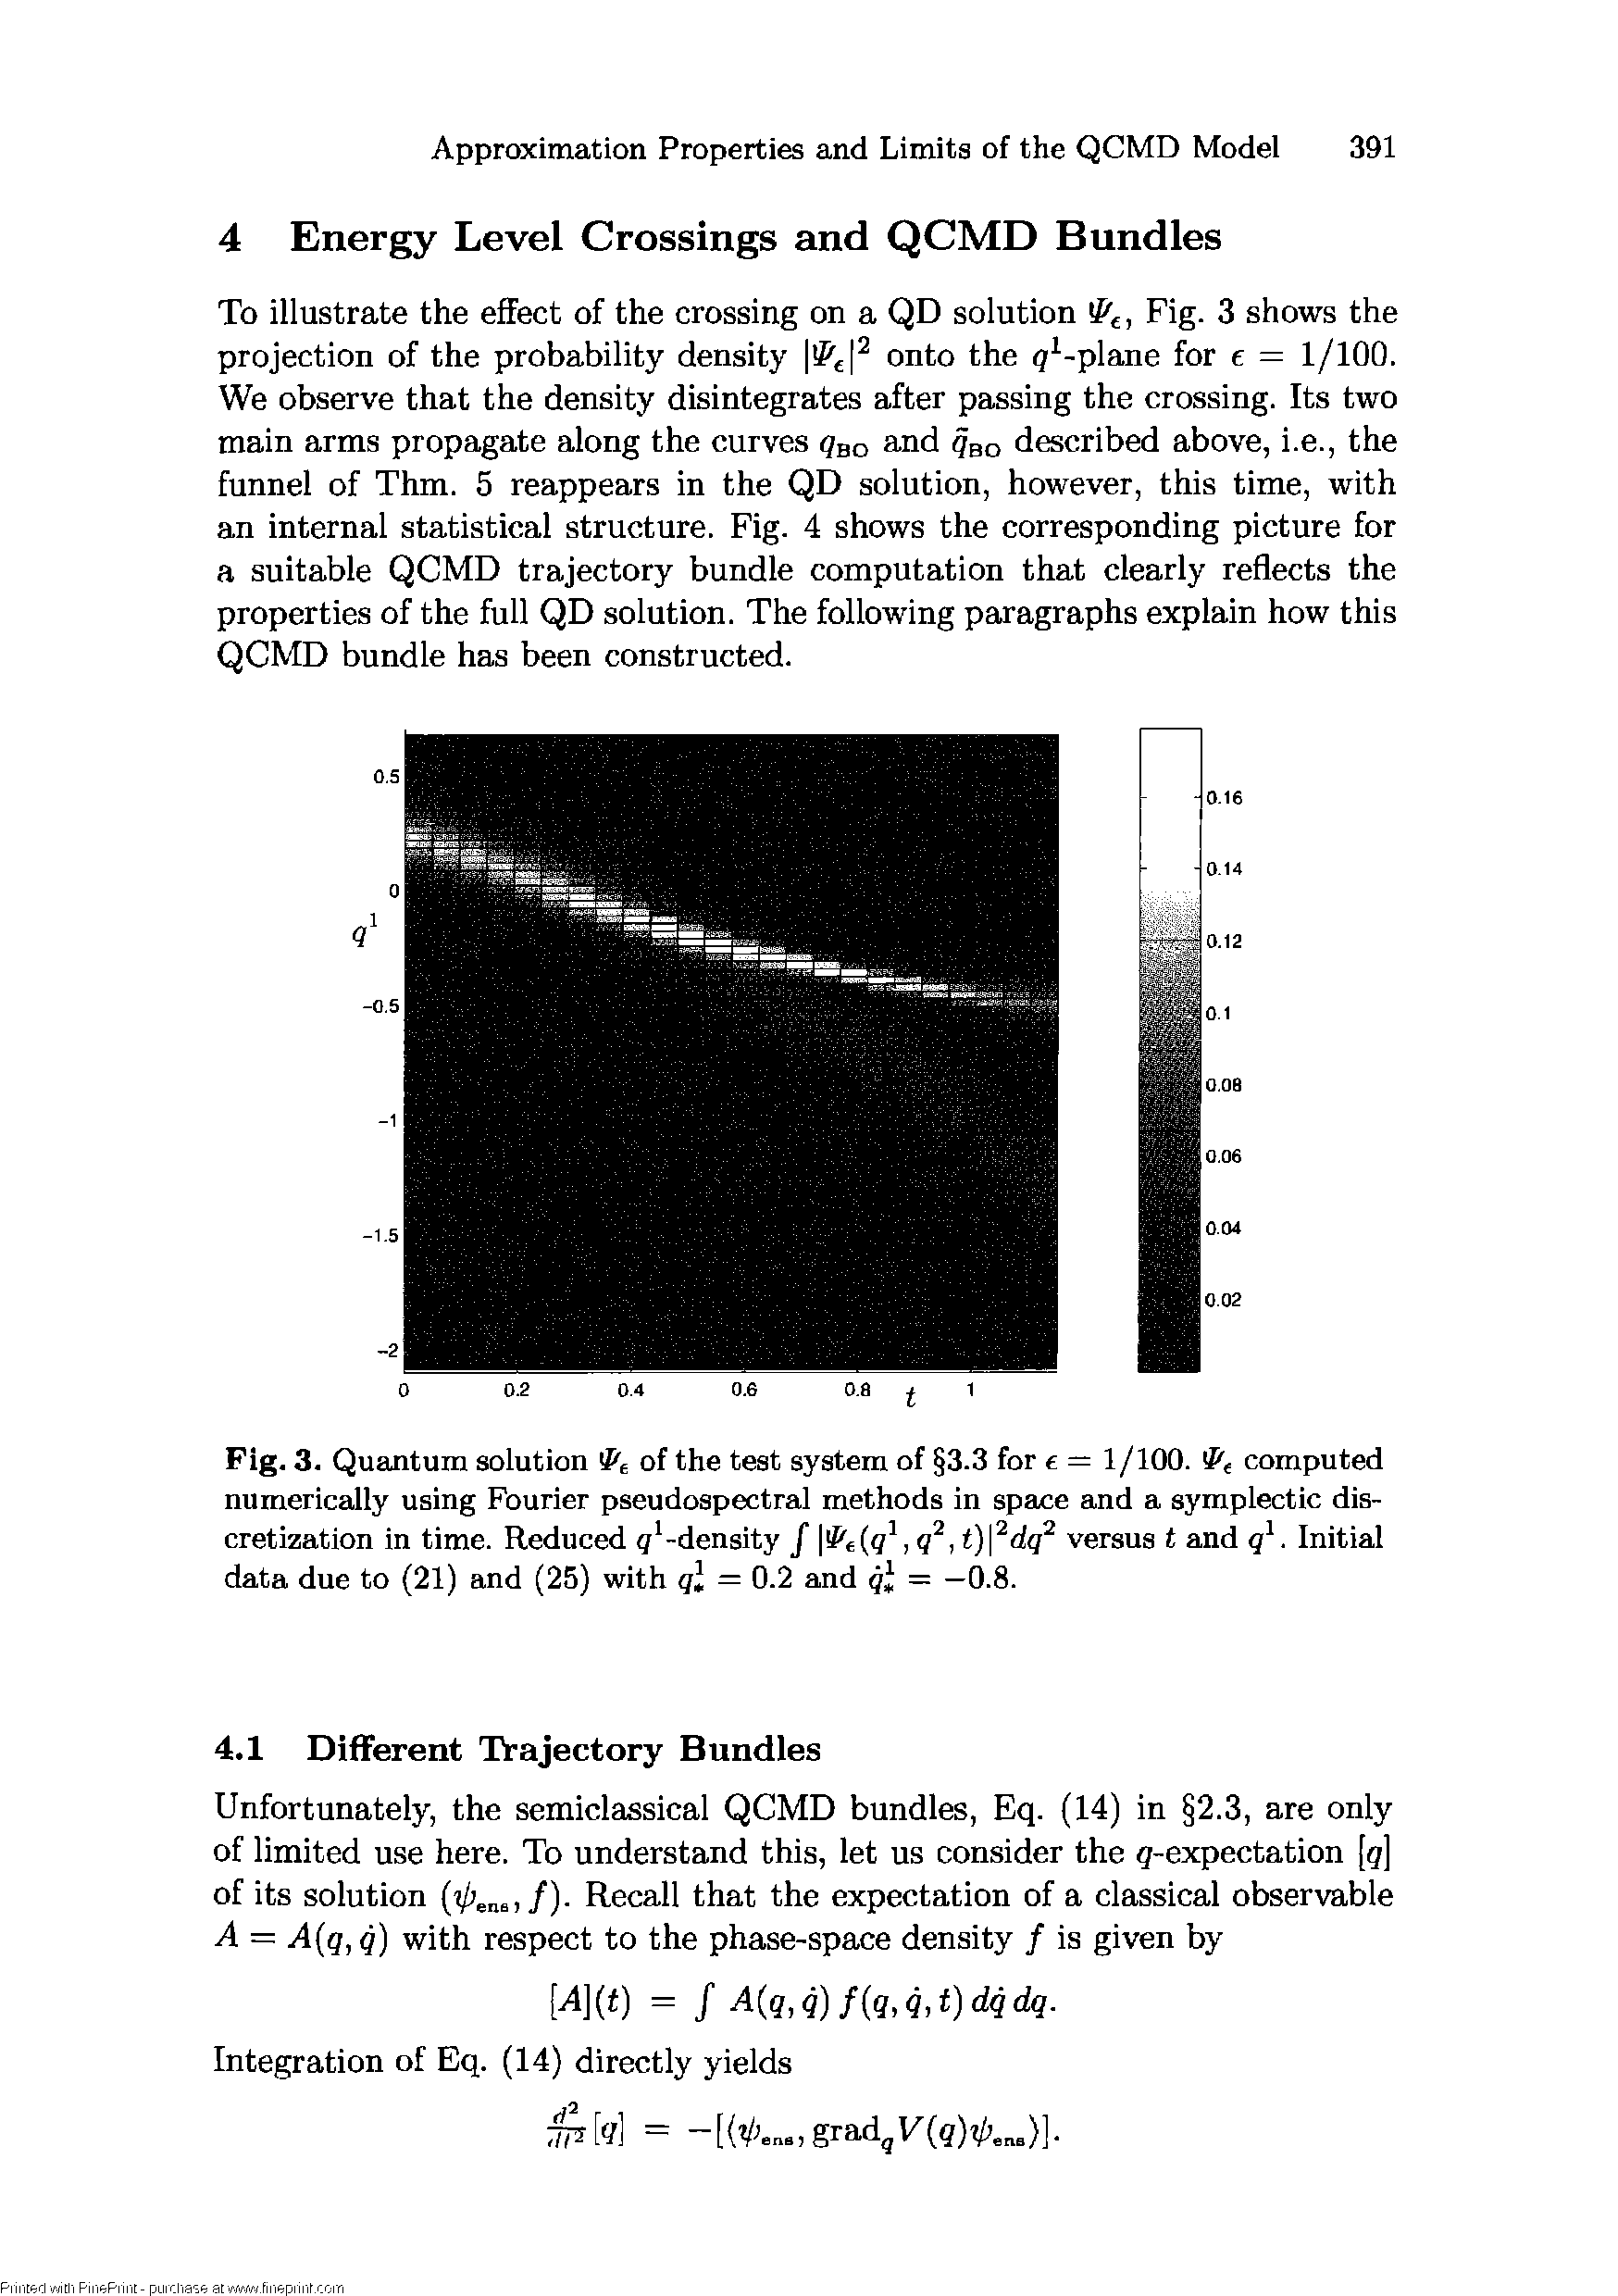 Fig. 3. Quantum solution of the test system of 3.3 for e = 1/100. computed numerically using Fourier pseudospectral methods in space and a syraplectic discretization in time. Reduced g -density f t)j dg versus t and qF Initial...